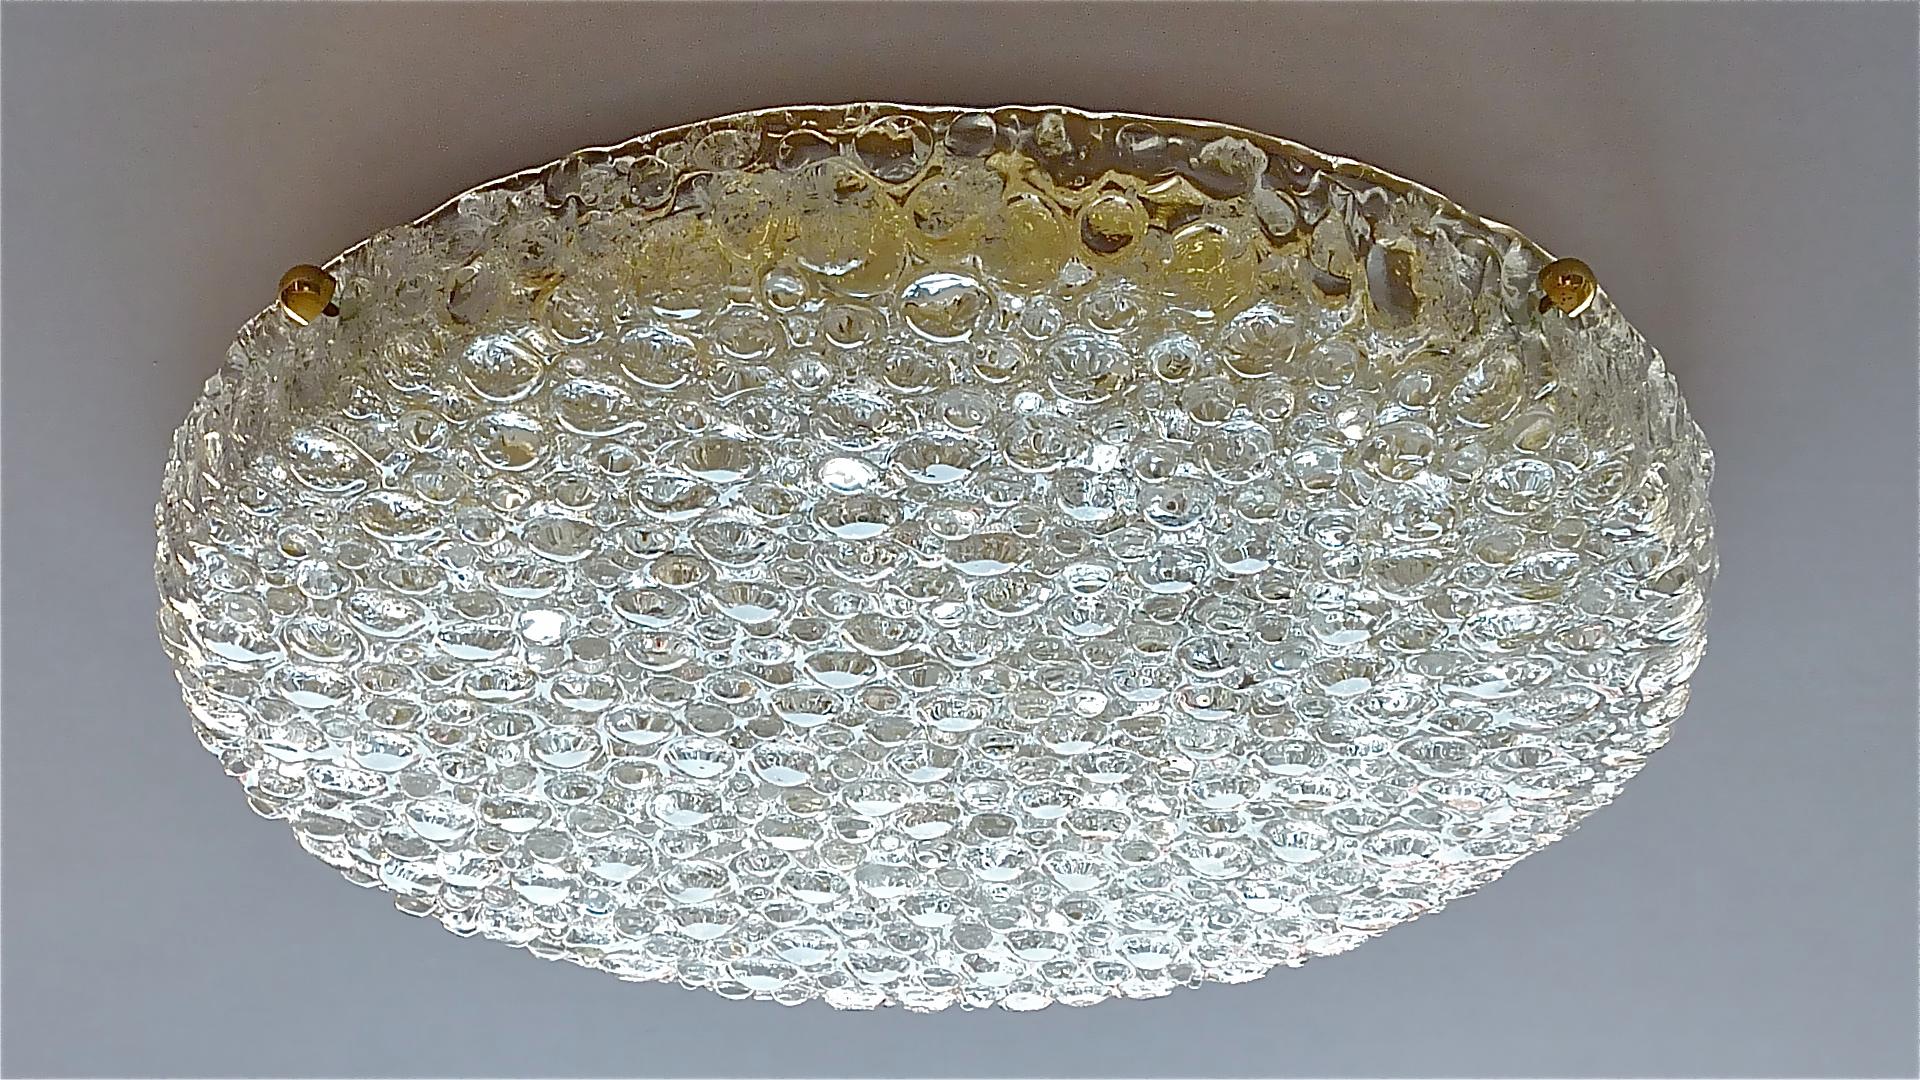 Huge round extra large textured Murano glass flush mount or ceiling light made by Hillebrand Leuchten, Germany, 1960s. The Midcentury Modern light fixture has a solid patinated brass base, six porcelain fittings for six E14 standard screw bulbs